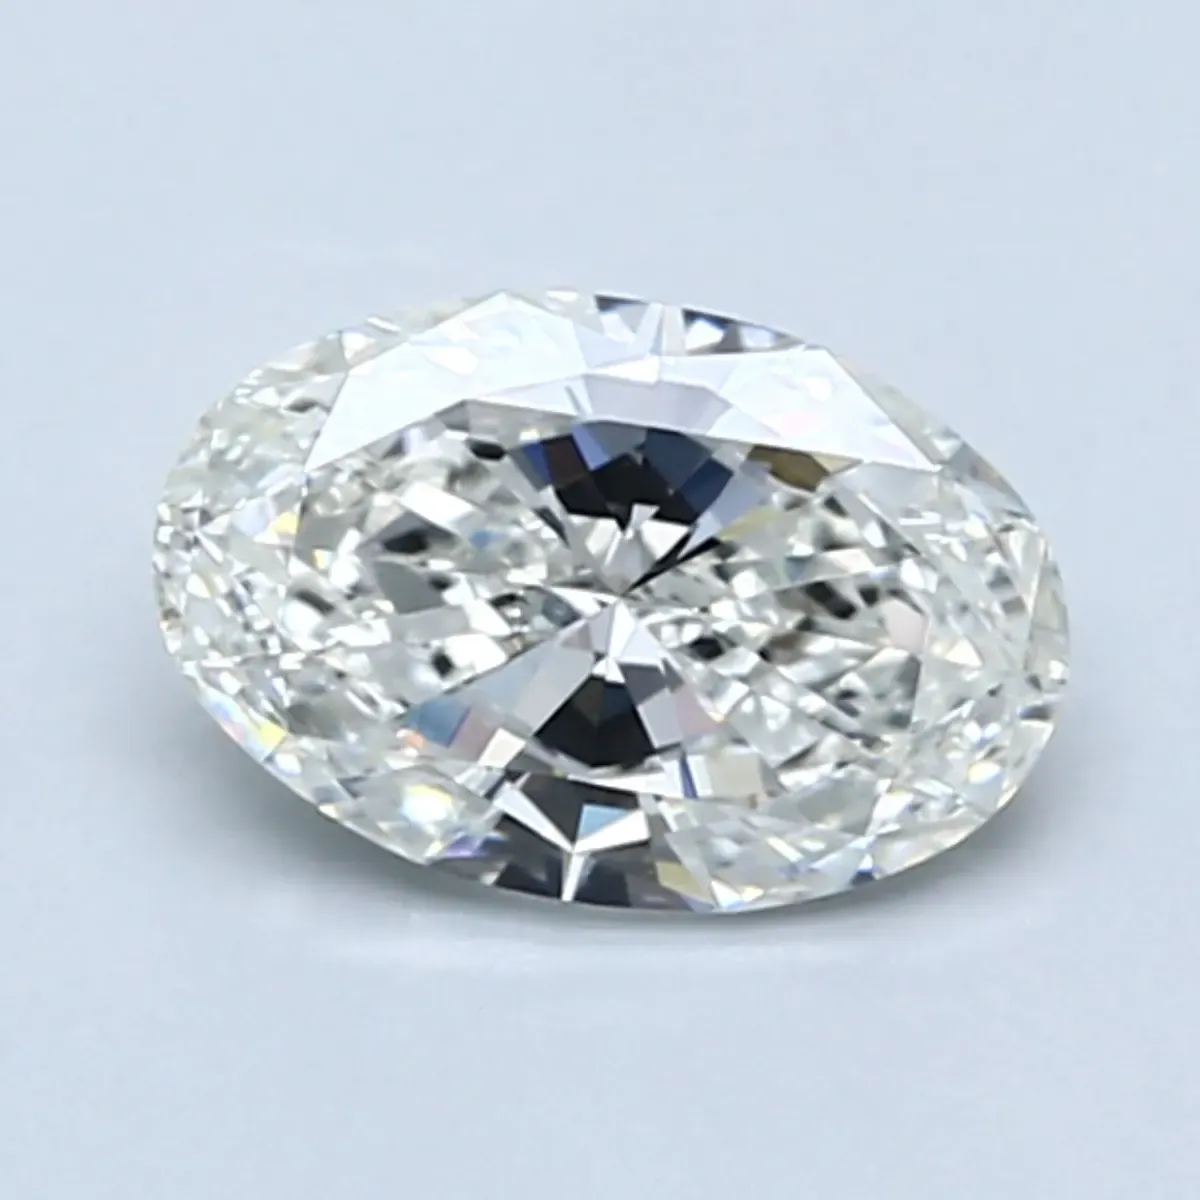 Oval Cut Diamonds: How to Buy with Confidence